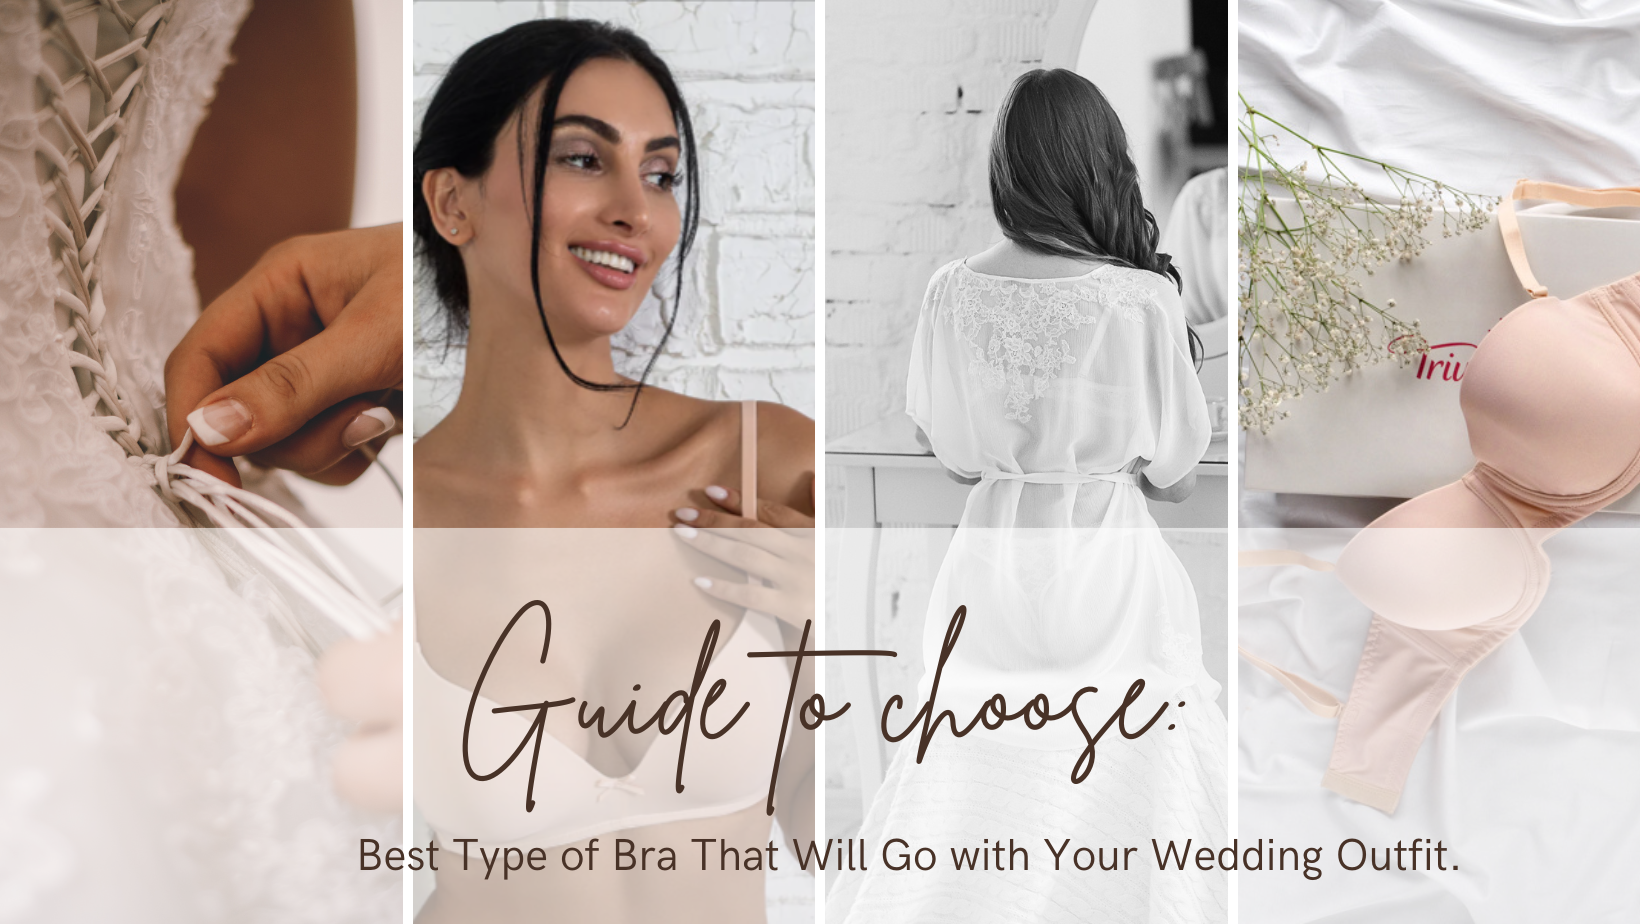 https://cdn.shopify.com/s/files/1/0490/9160/8732/articles/Guide_to_choose_best_type_of_bra.png?v=1688543753